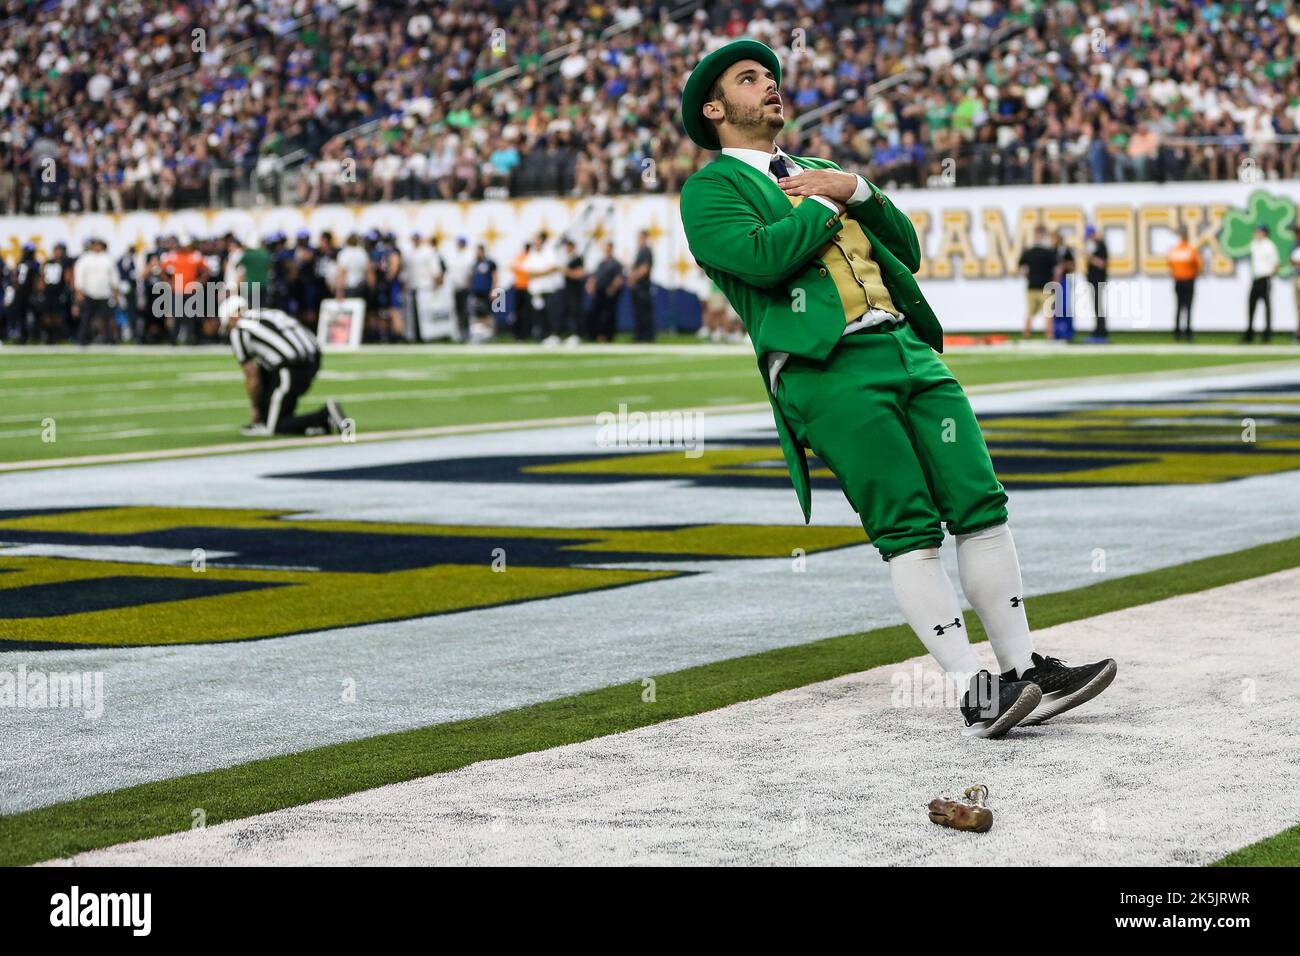 Las Vegas, NV, USA. 8th Oct, 2022. Notre Dame Fighting Irish mascot in action during the first half of the college football game featuring the Brigham Young Cougars and the Notre Dame Fighting Irish at Allegiant Stadium in Las Vegas, NV. Christopher Trim/CSM/Alamy Live News Stock Photo